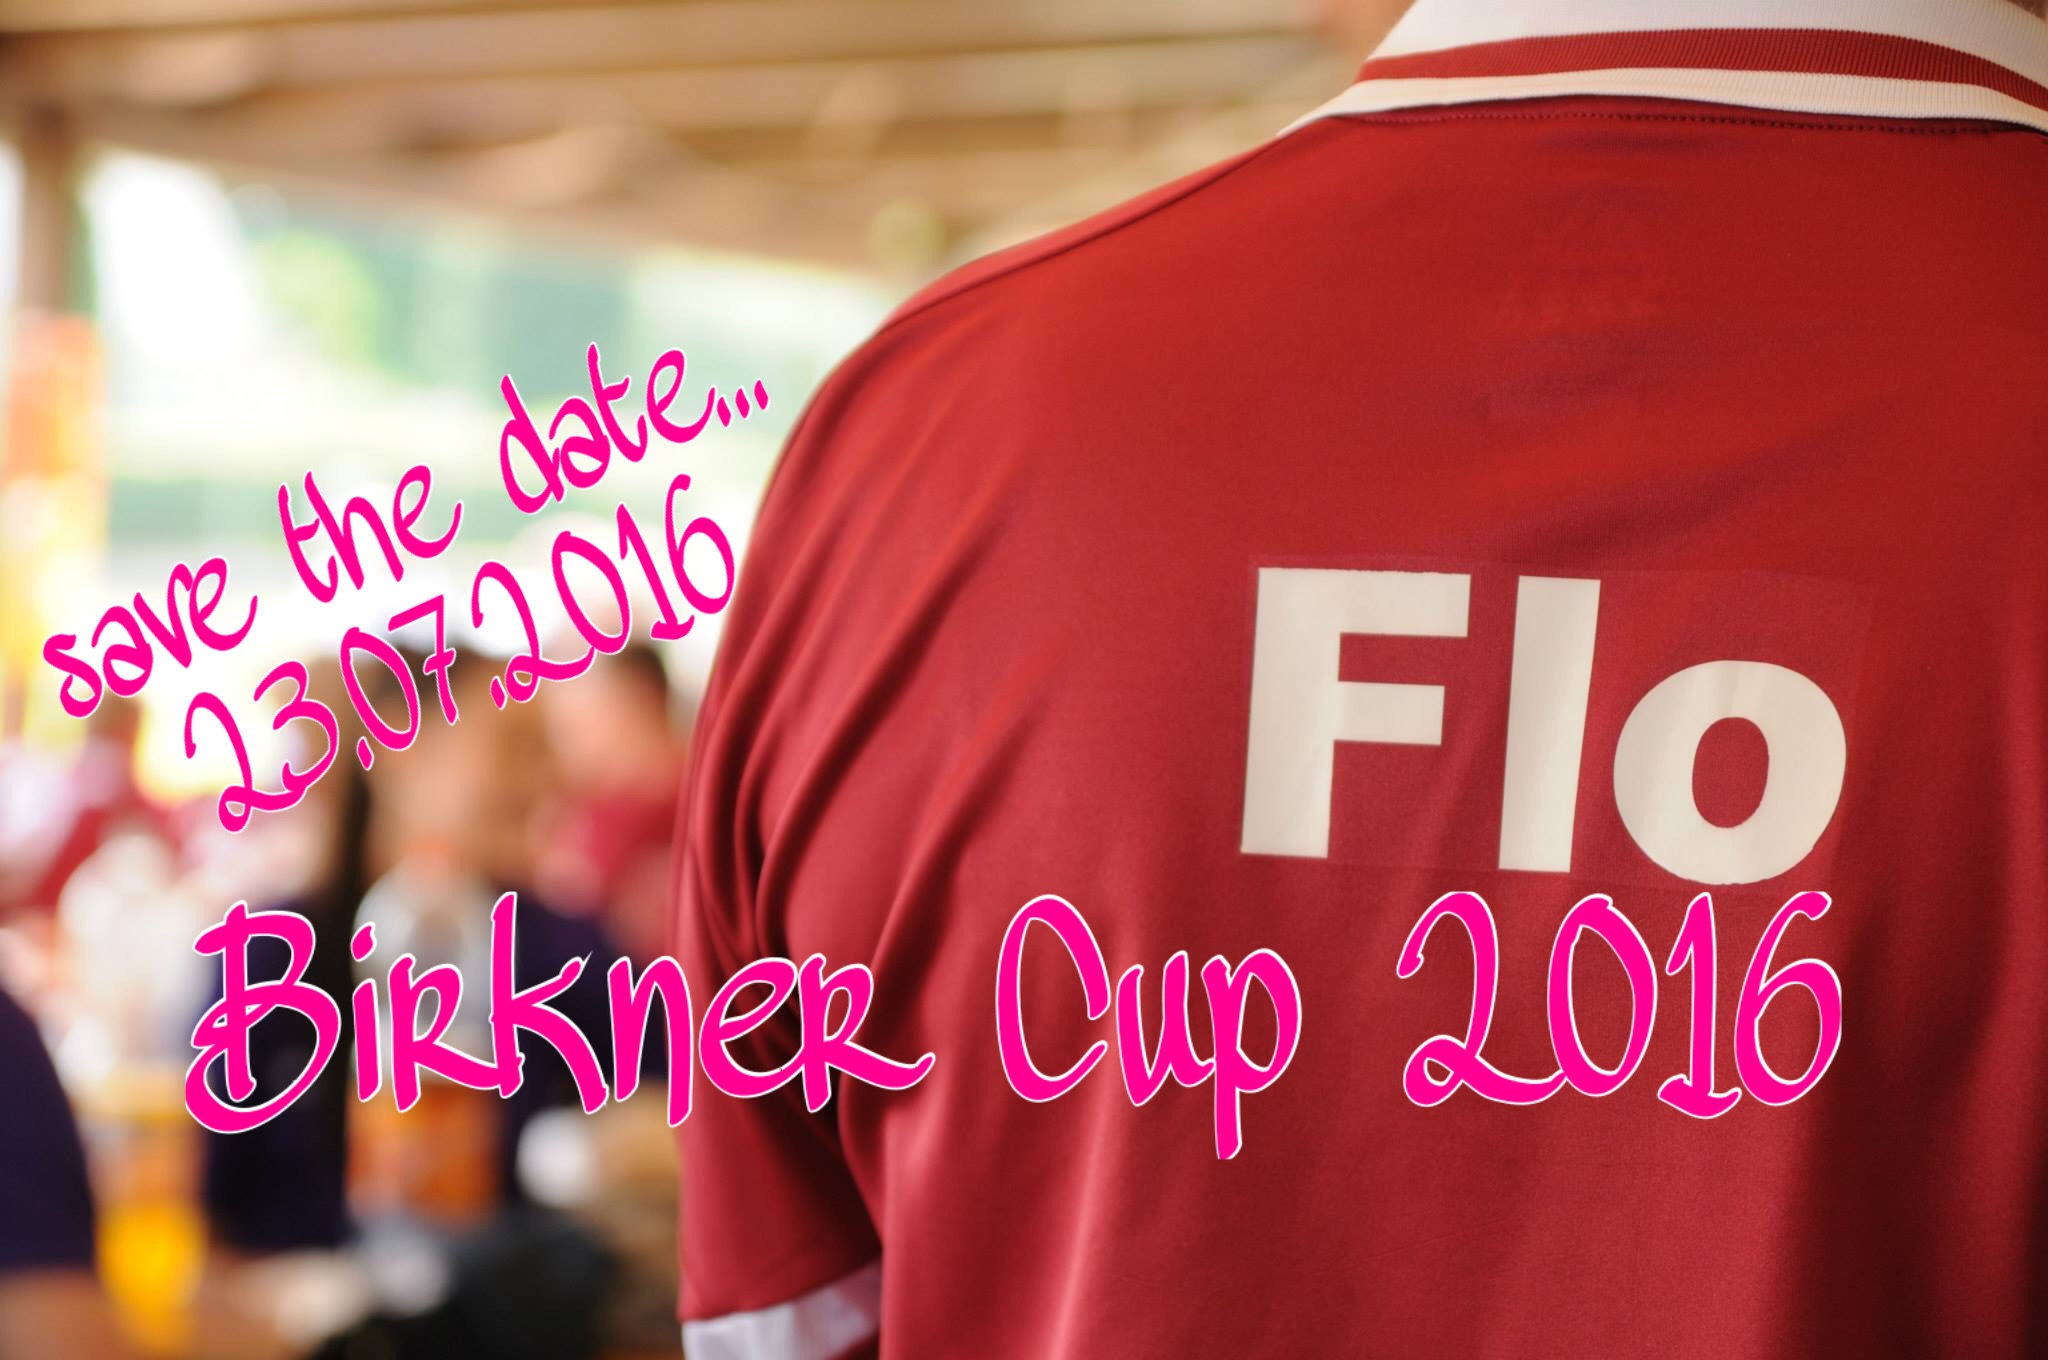 You are currently viewing save the date – Flo Birkner Cup 2016 – 23.07.16